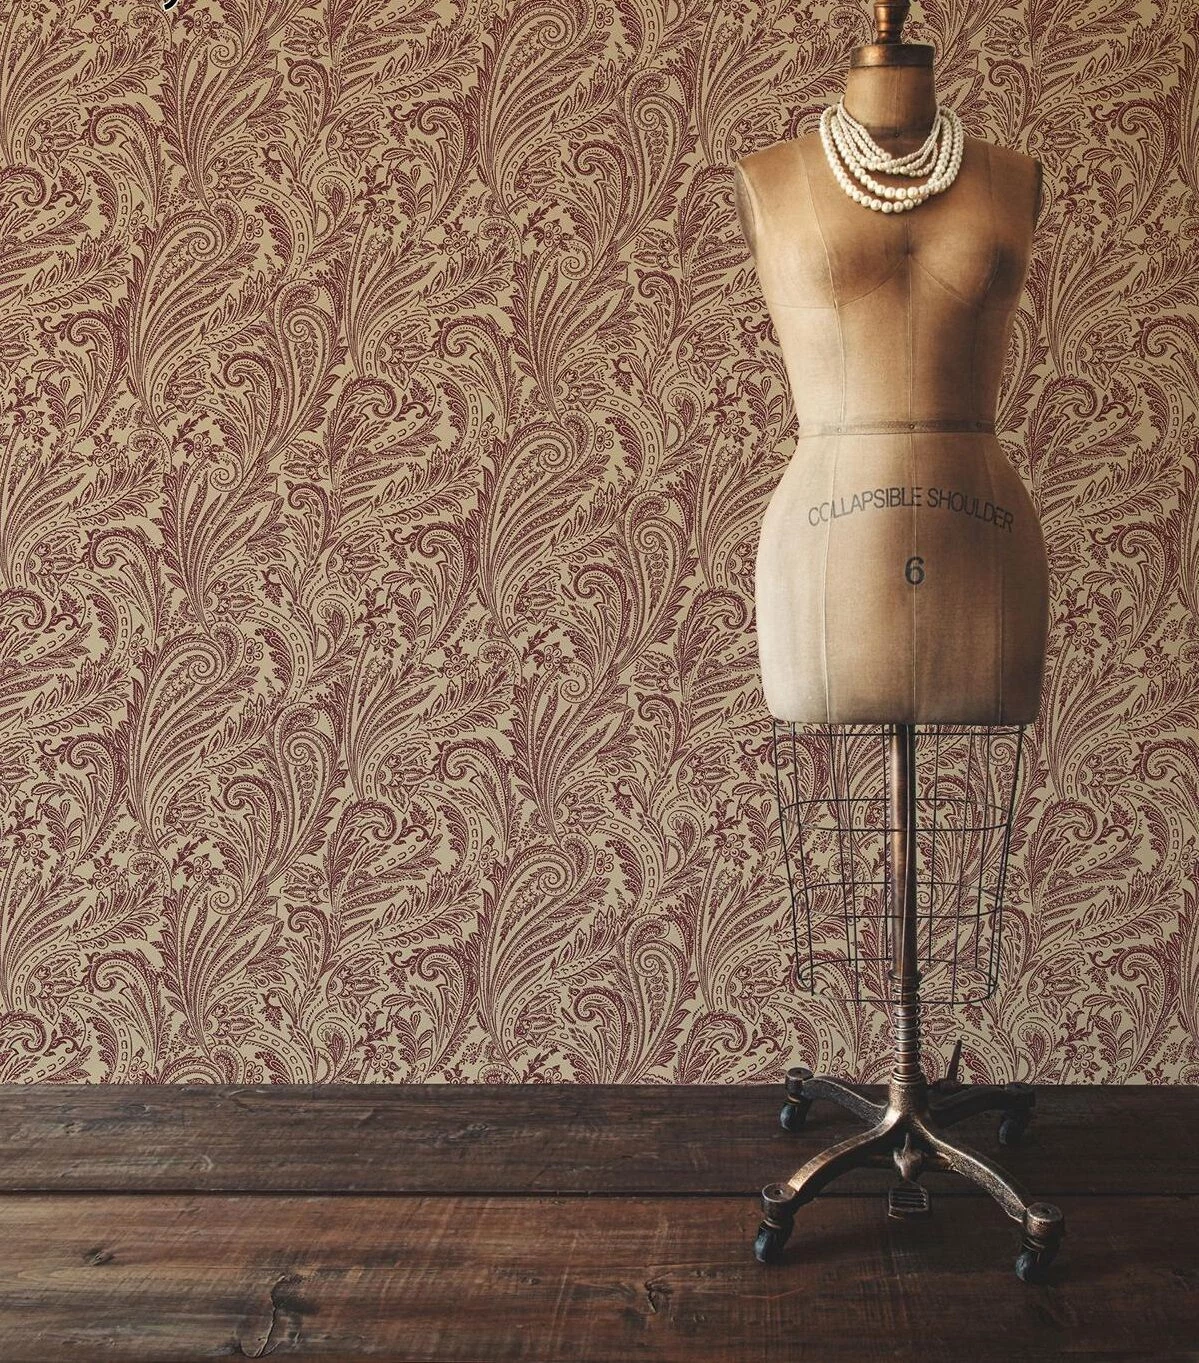 baroque-inspired wallpaper, featuring dark red patterns, on a cream background, vintage dress-makers dummy and wooden floor